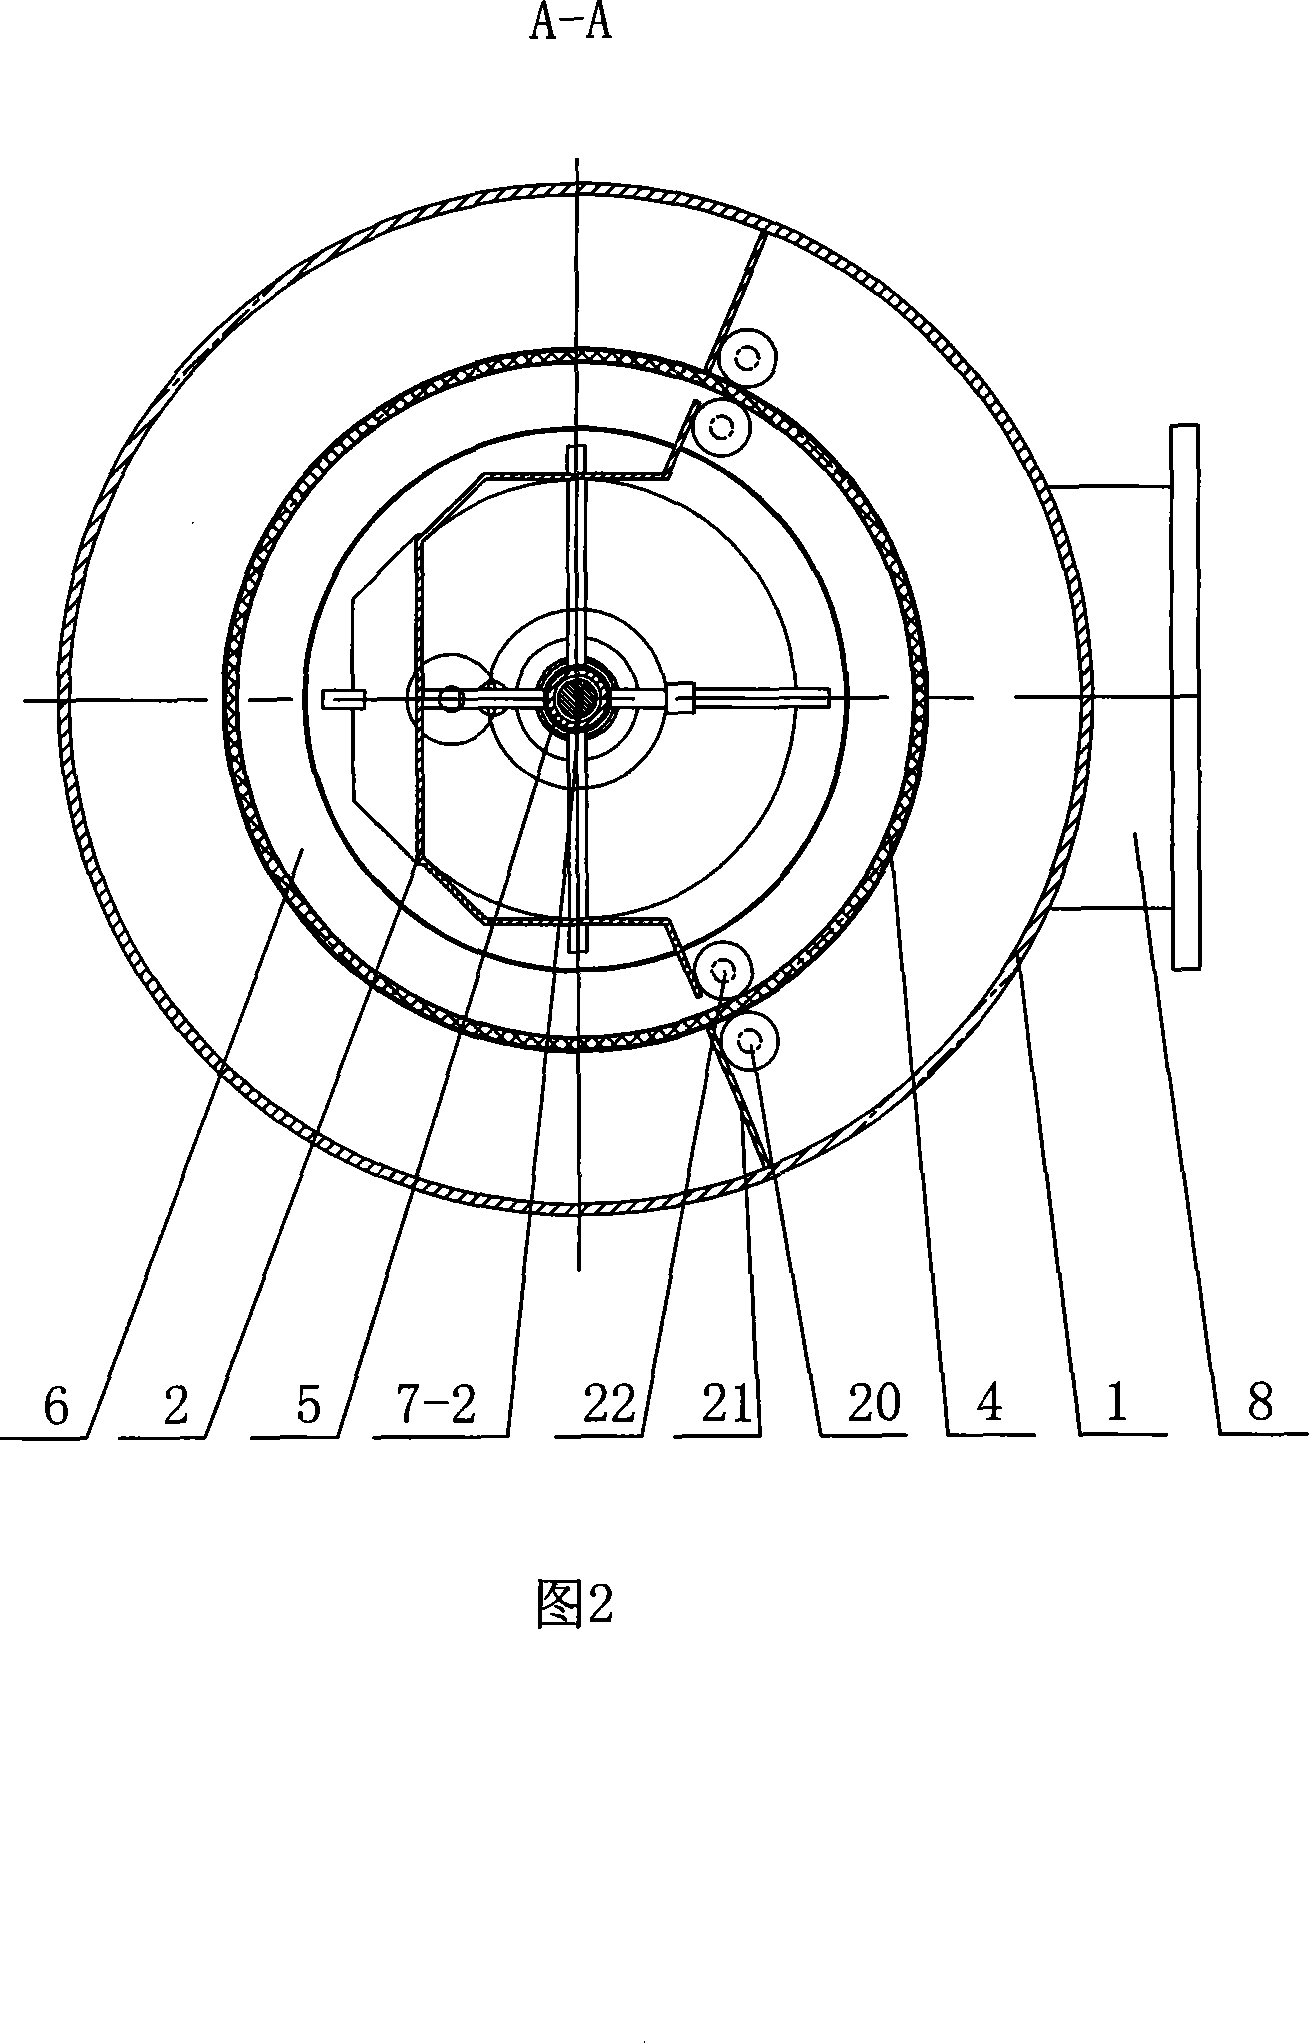 Self-cleaning sewage treating device